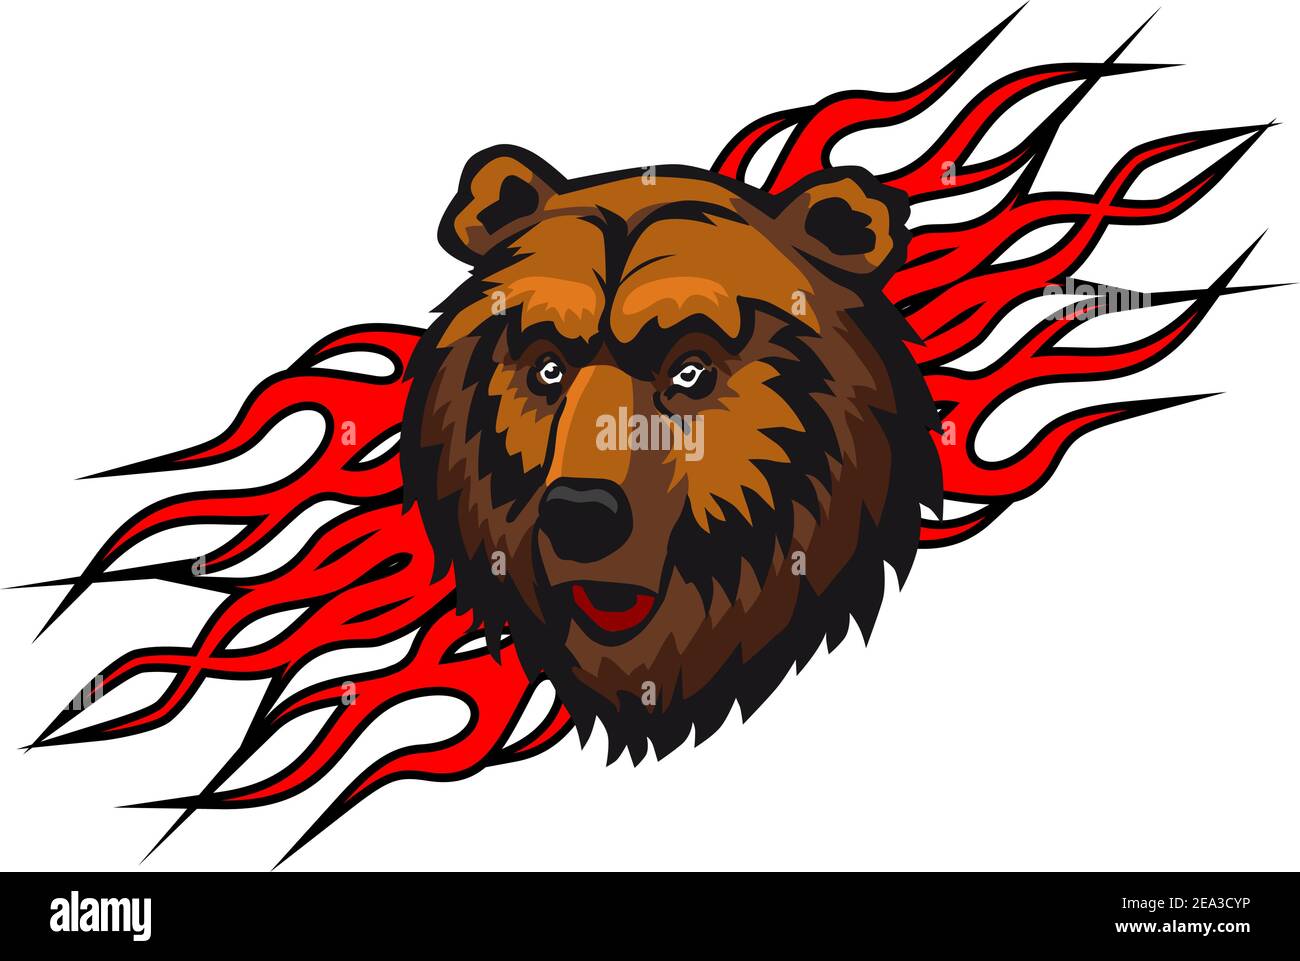 Wild bear as a mascot or tattoo with fire flames Stock Vector